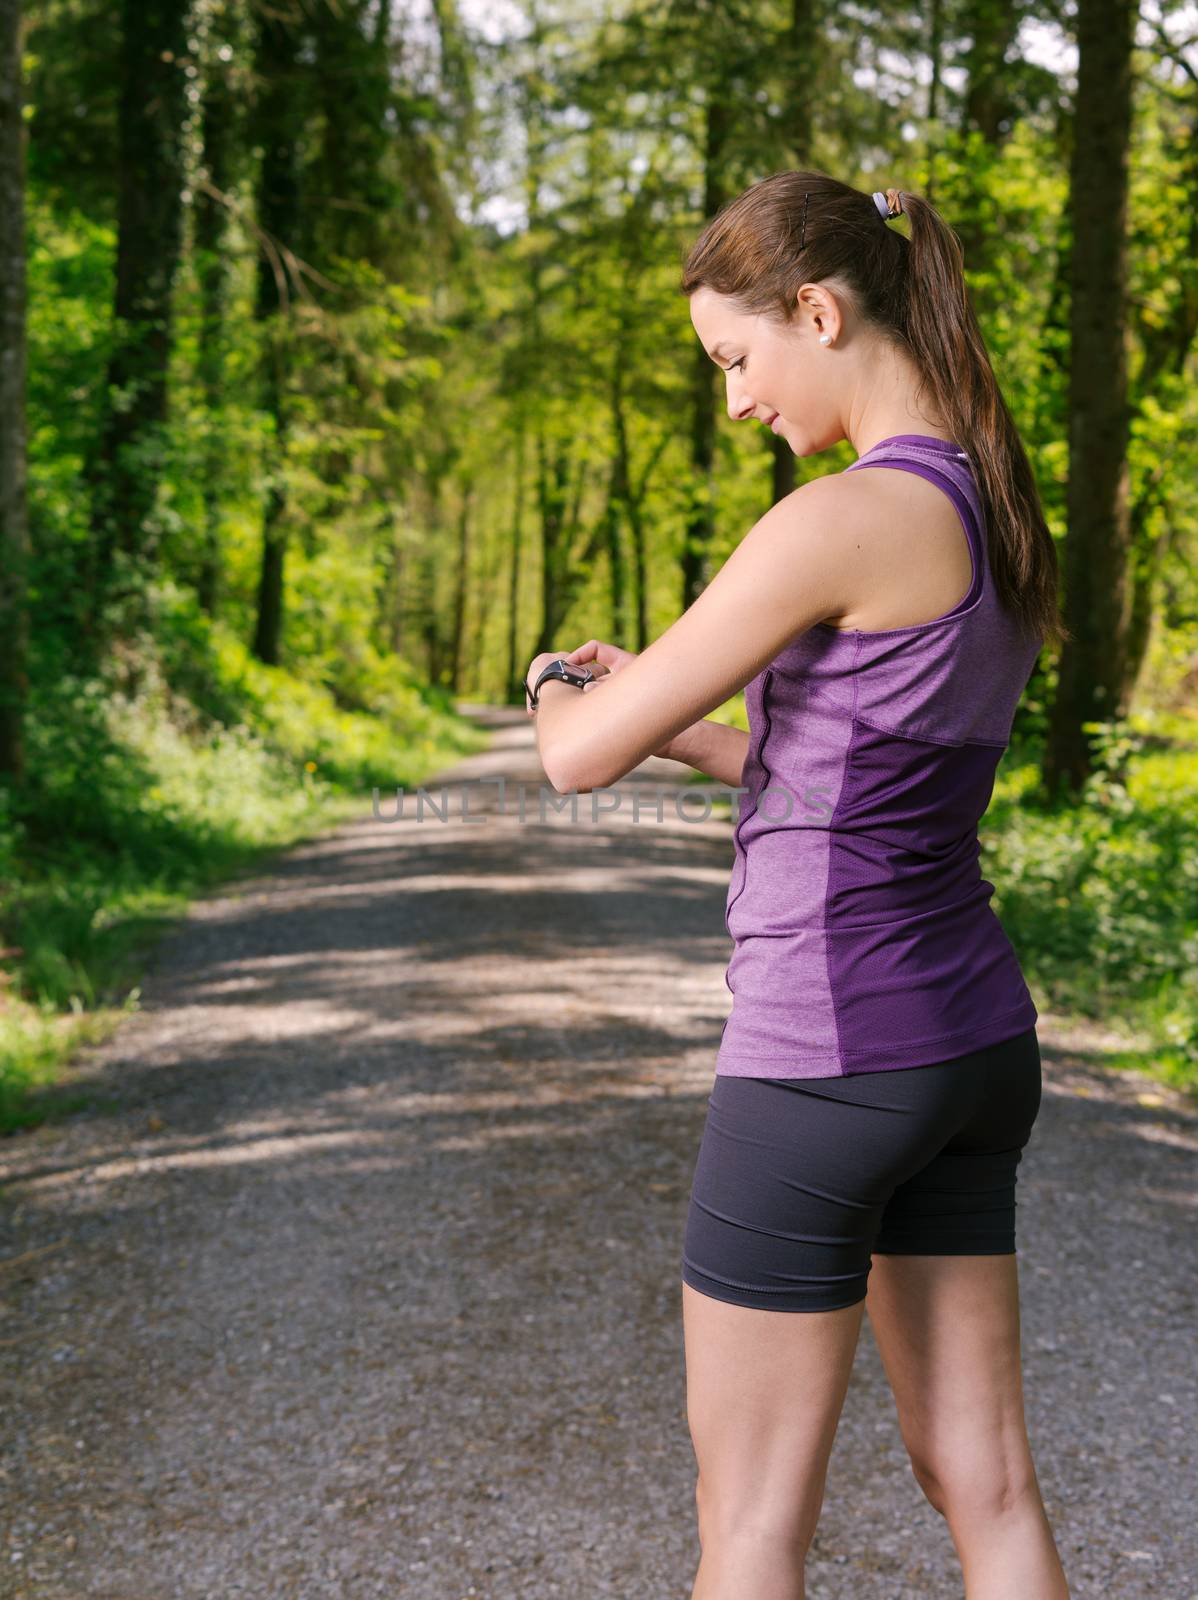 Photo of a young woman on a jogging path through a forest checking her running time.